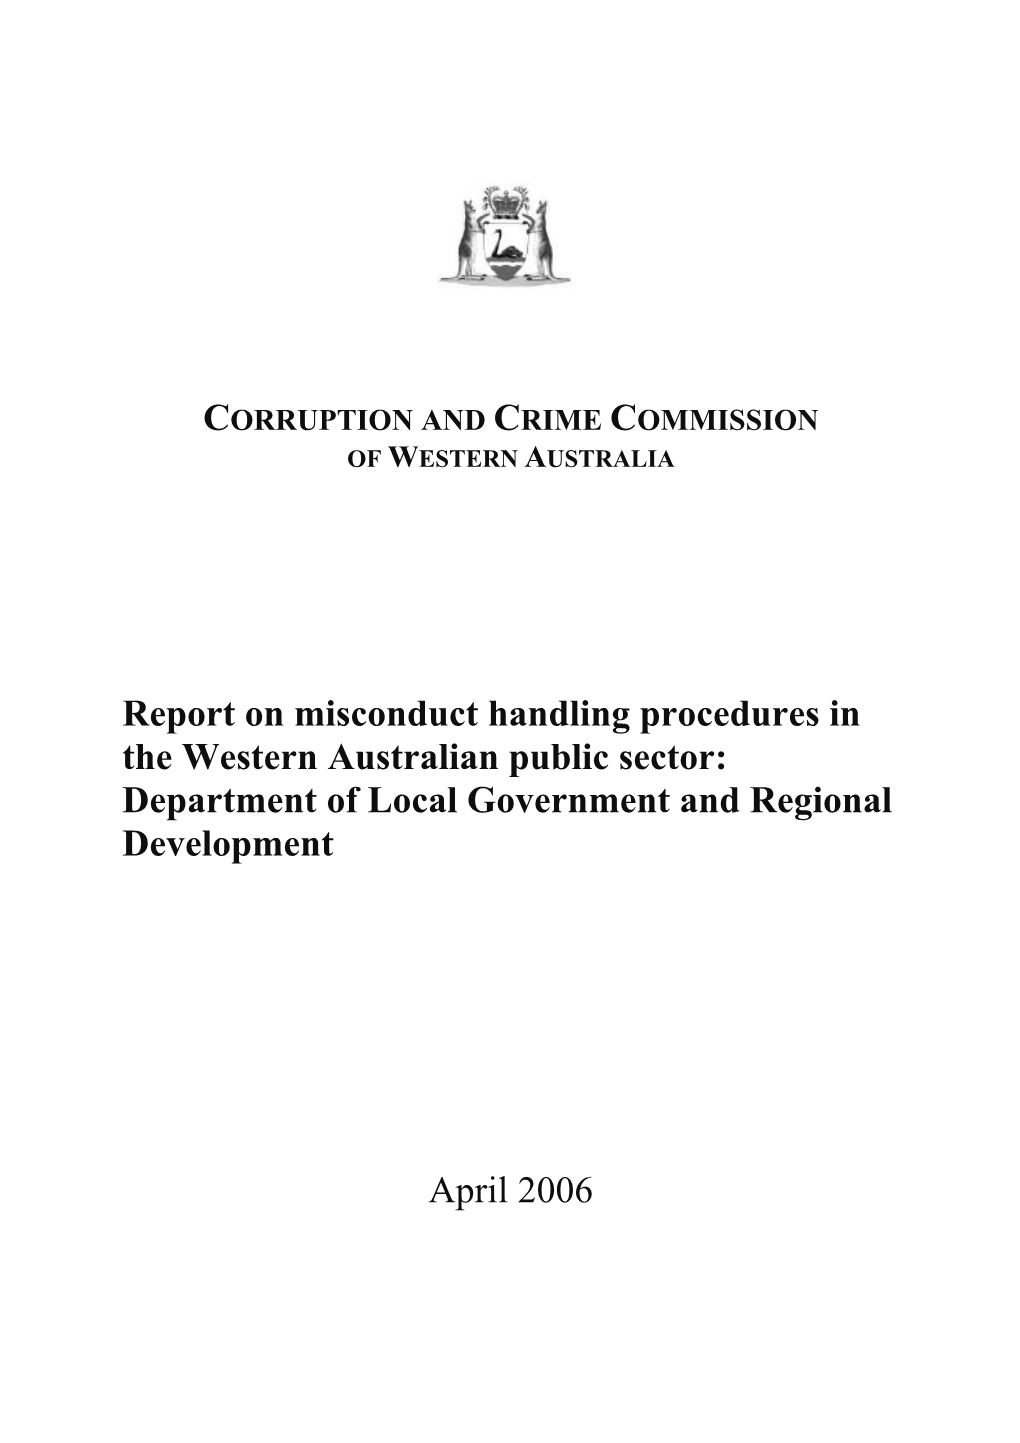 Report on Misconduct Handling Procedures in the Western Australian Public Sector: Department of Local Government and Regional Development